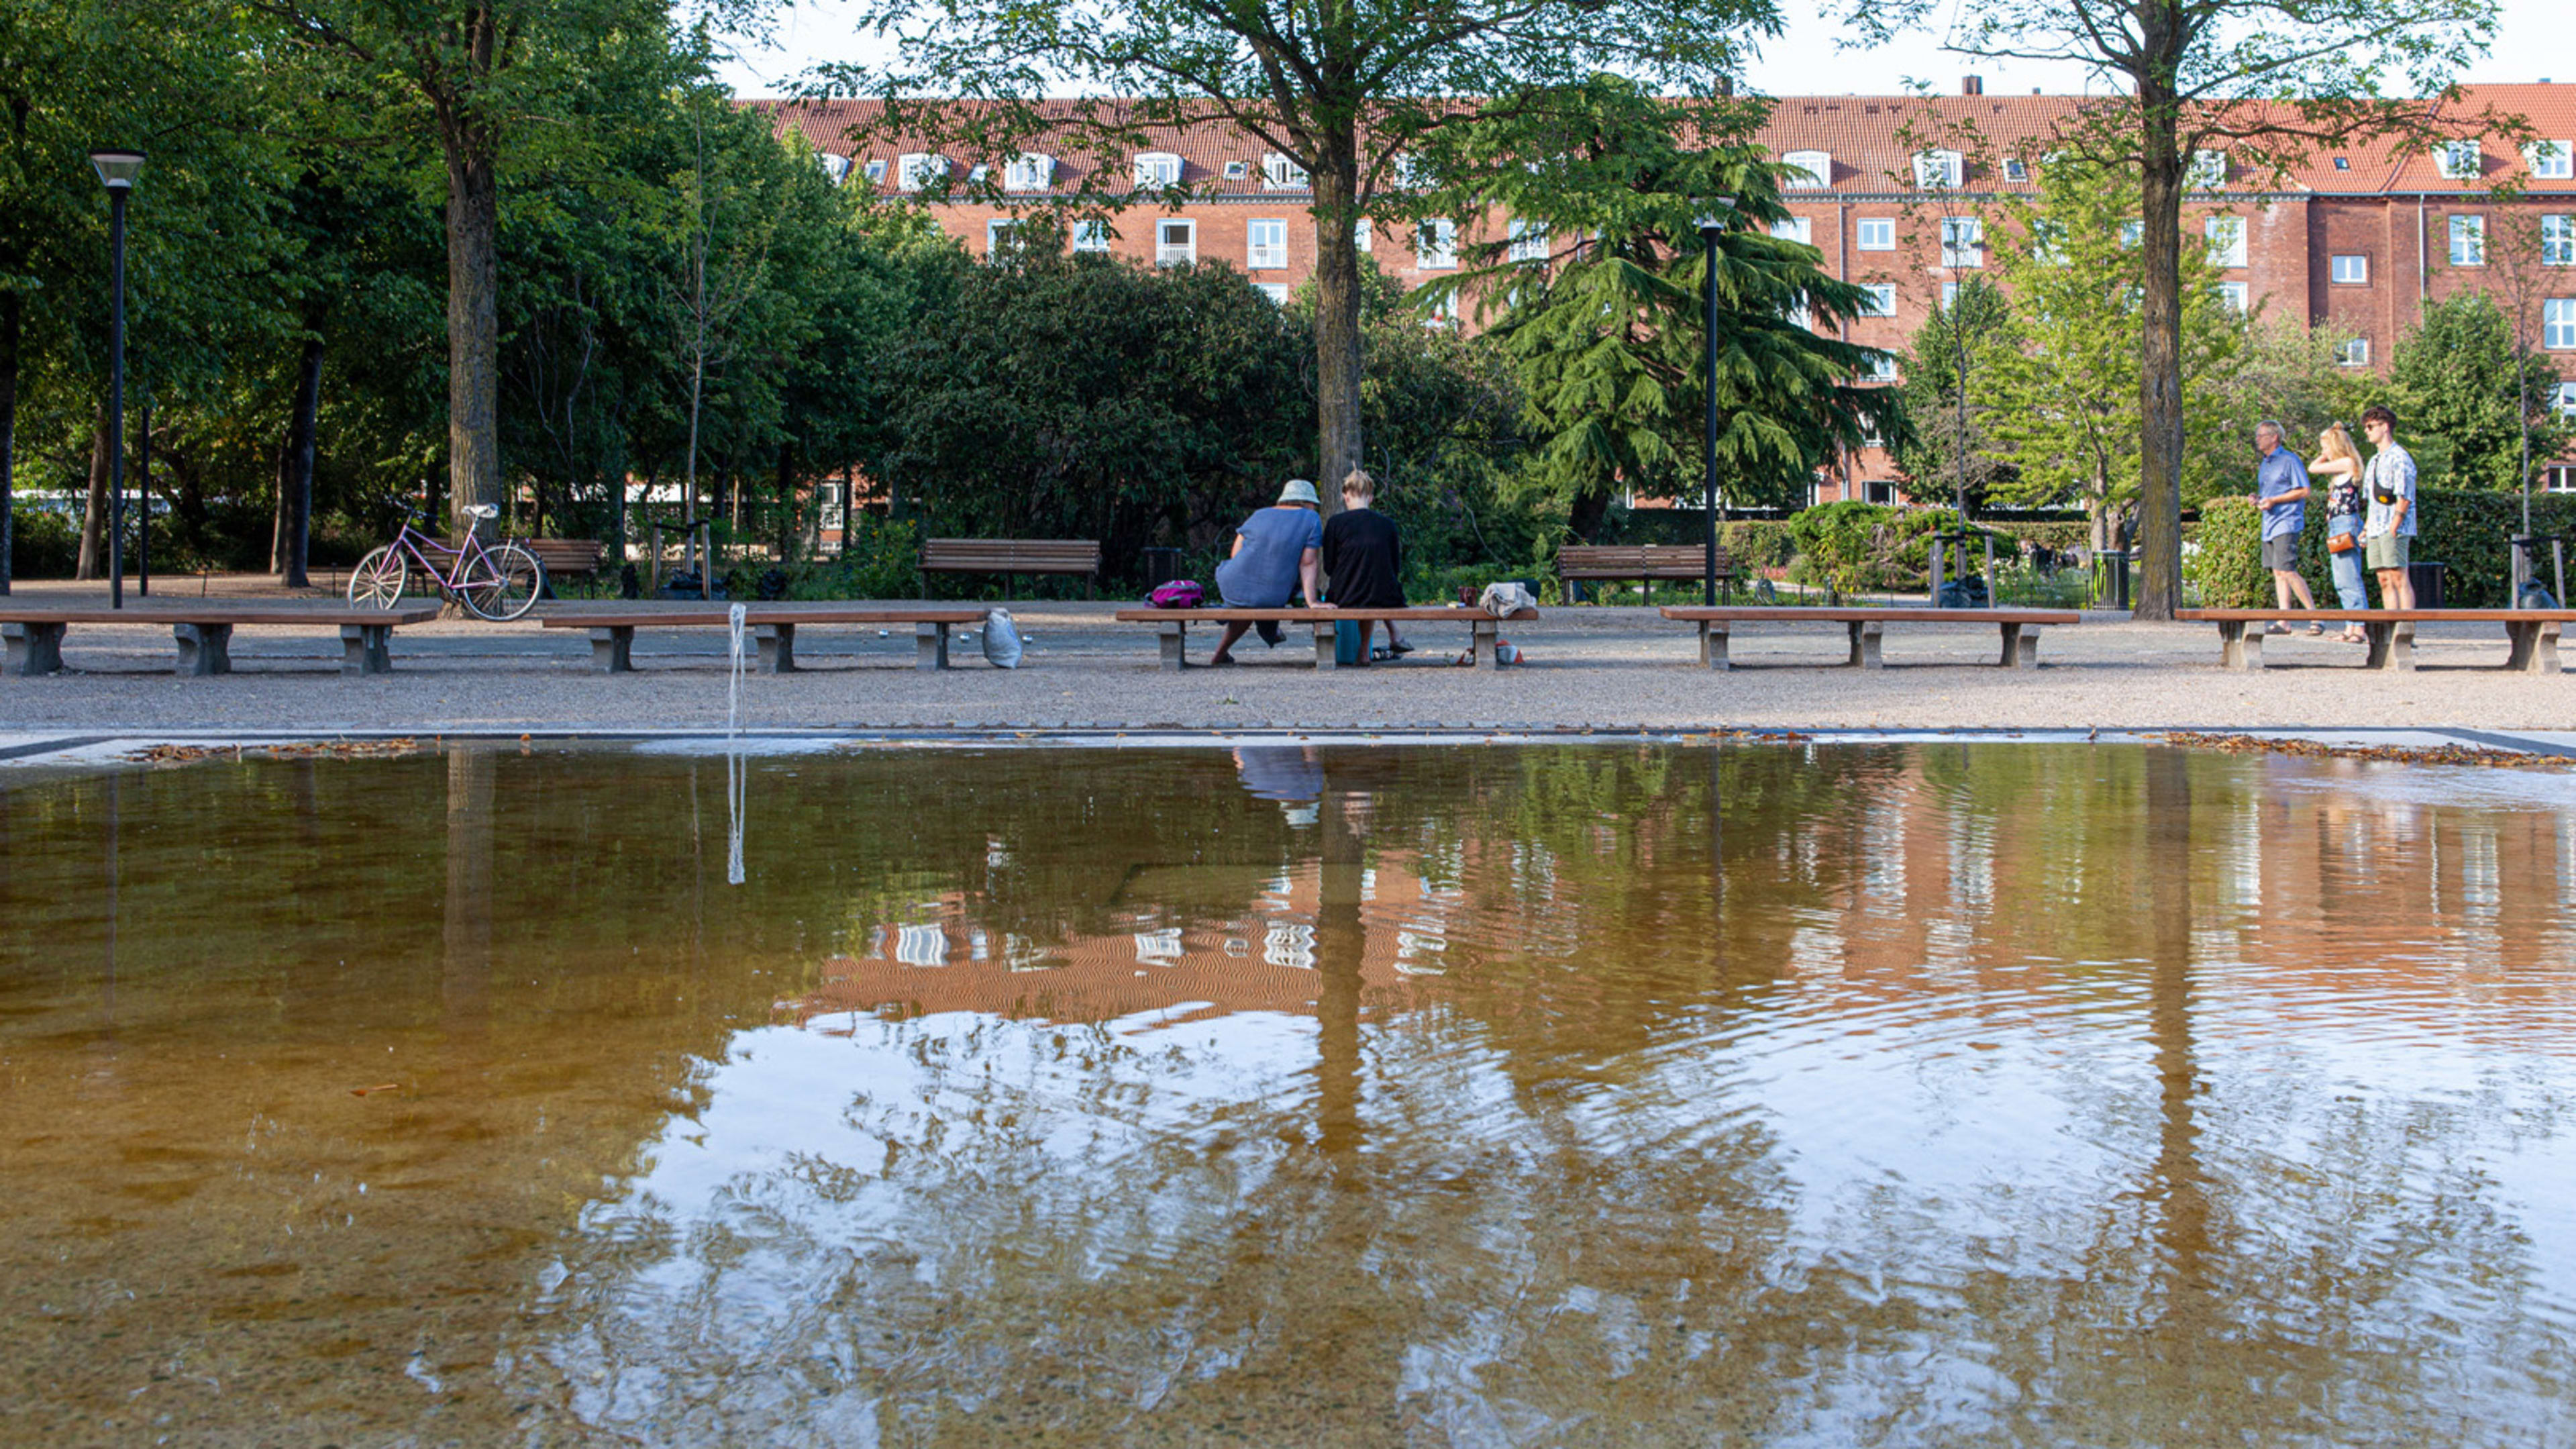 This ‘climate park’ in Copenhagen now doubles as flood infrastructure